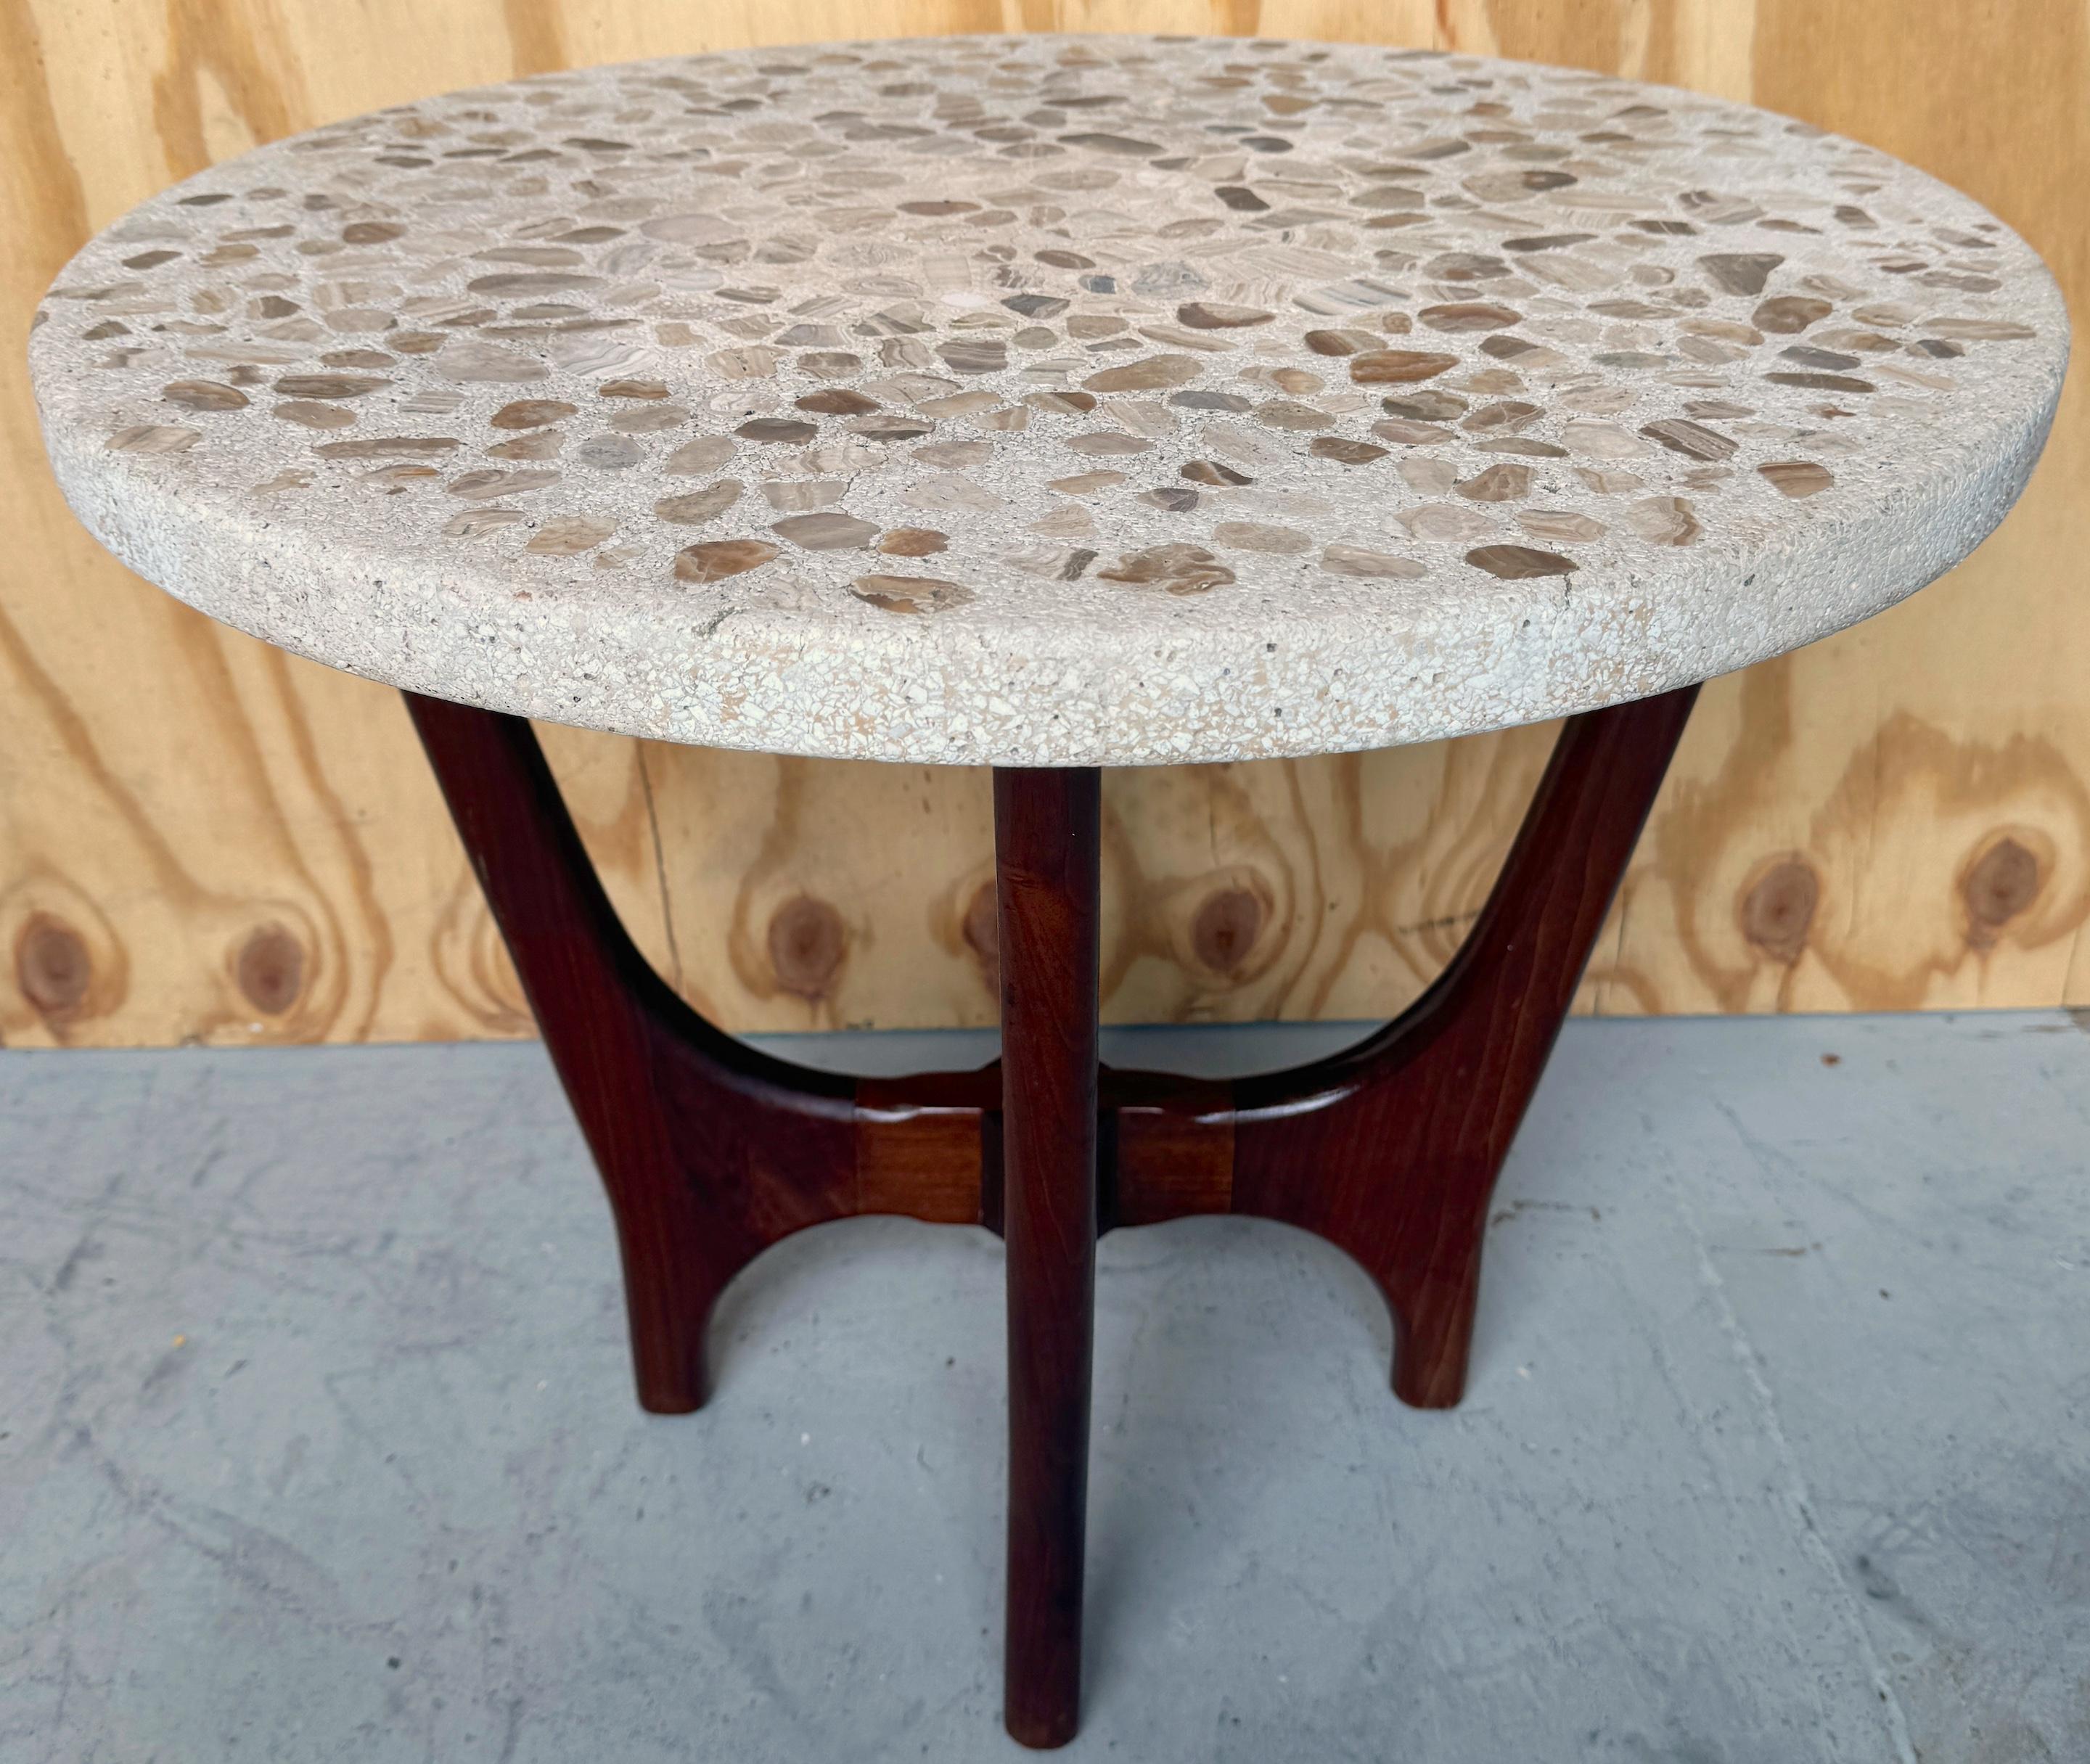 Harvey Probber Onyx, Marble, Terrazzo and Walnut Side Table
USA, Circa 1960s

A rare Mid-Century Modern round end or occasional table designed by Harvey Probber, made in the  1960s. This exquisite piece stands at 19.5 inches in height with a